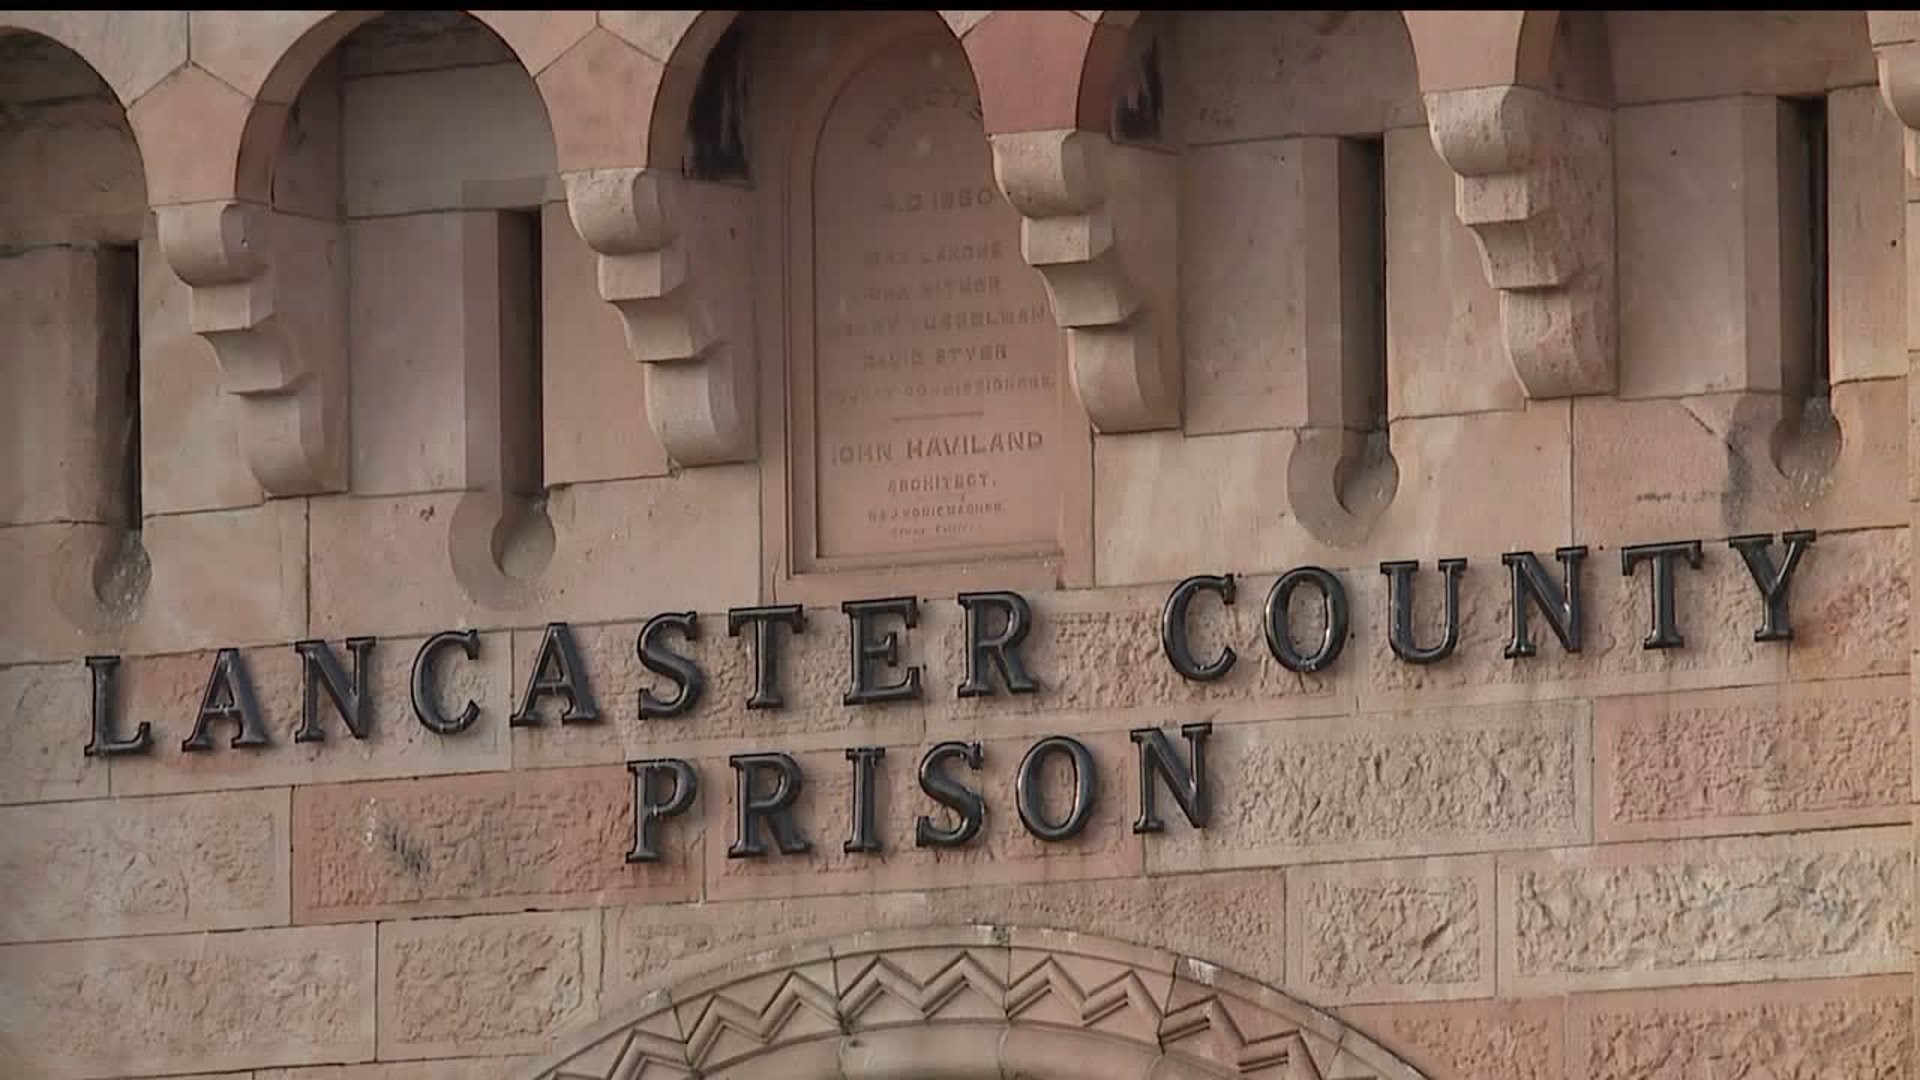 Women turned away from visitation at Lancaster County Prison after wearing underwire bras